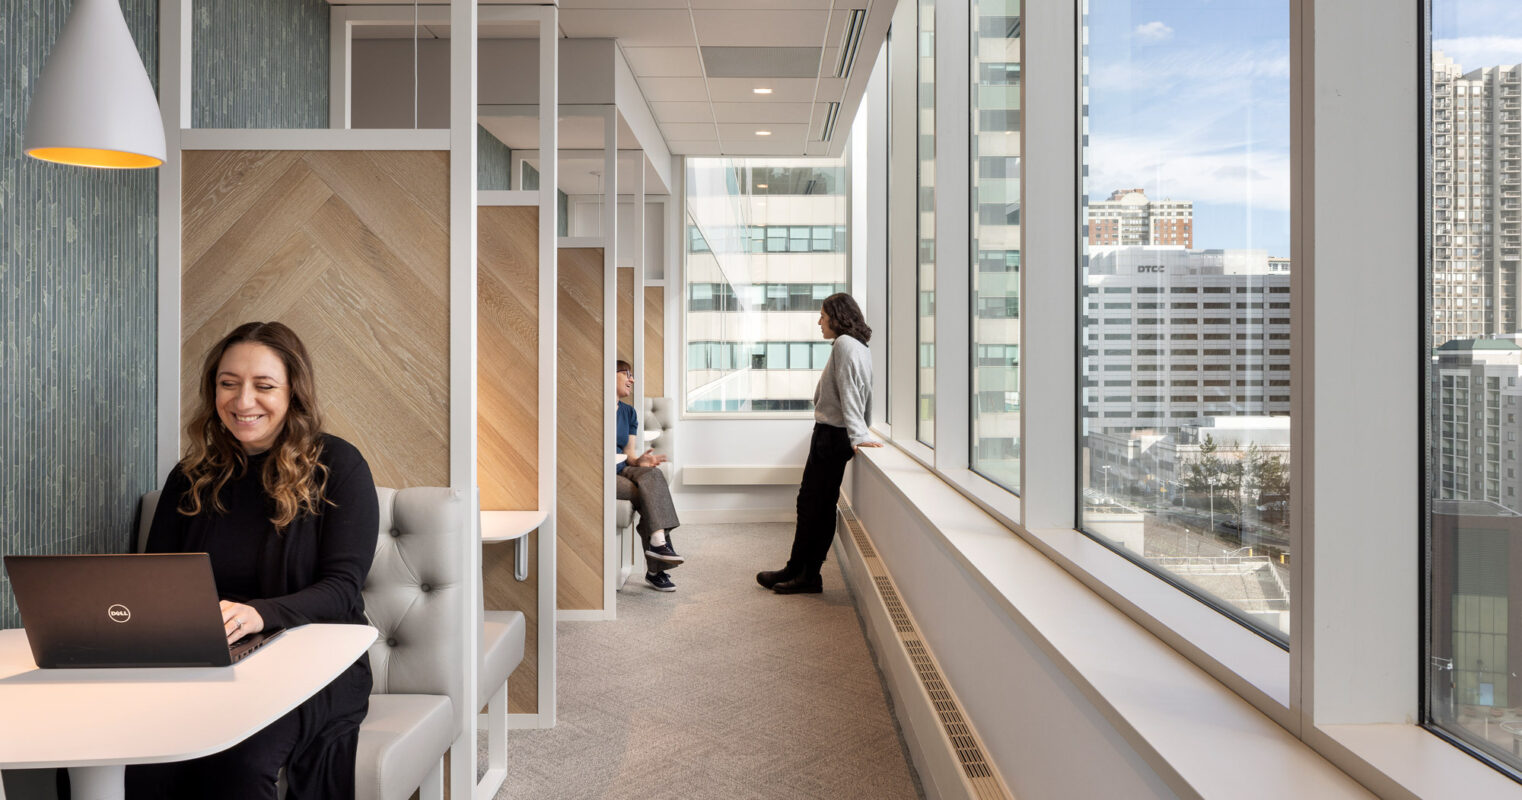 Light-filled office corridor with herringbone wood accents and individual work pods on one side and floor-to-ceiling windows offering a city view on the other, with people engaged in various work activities.